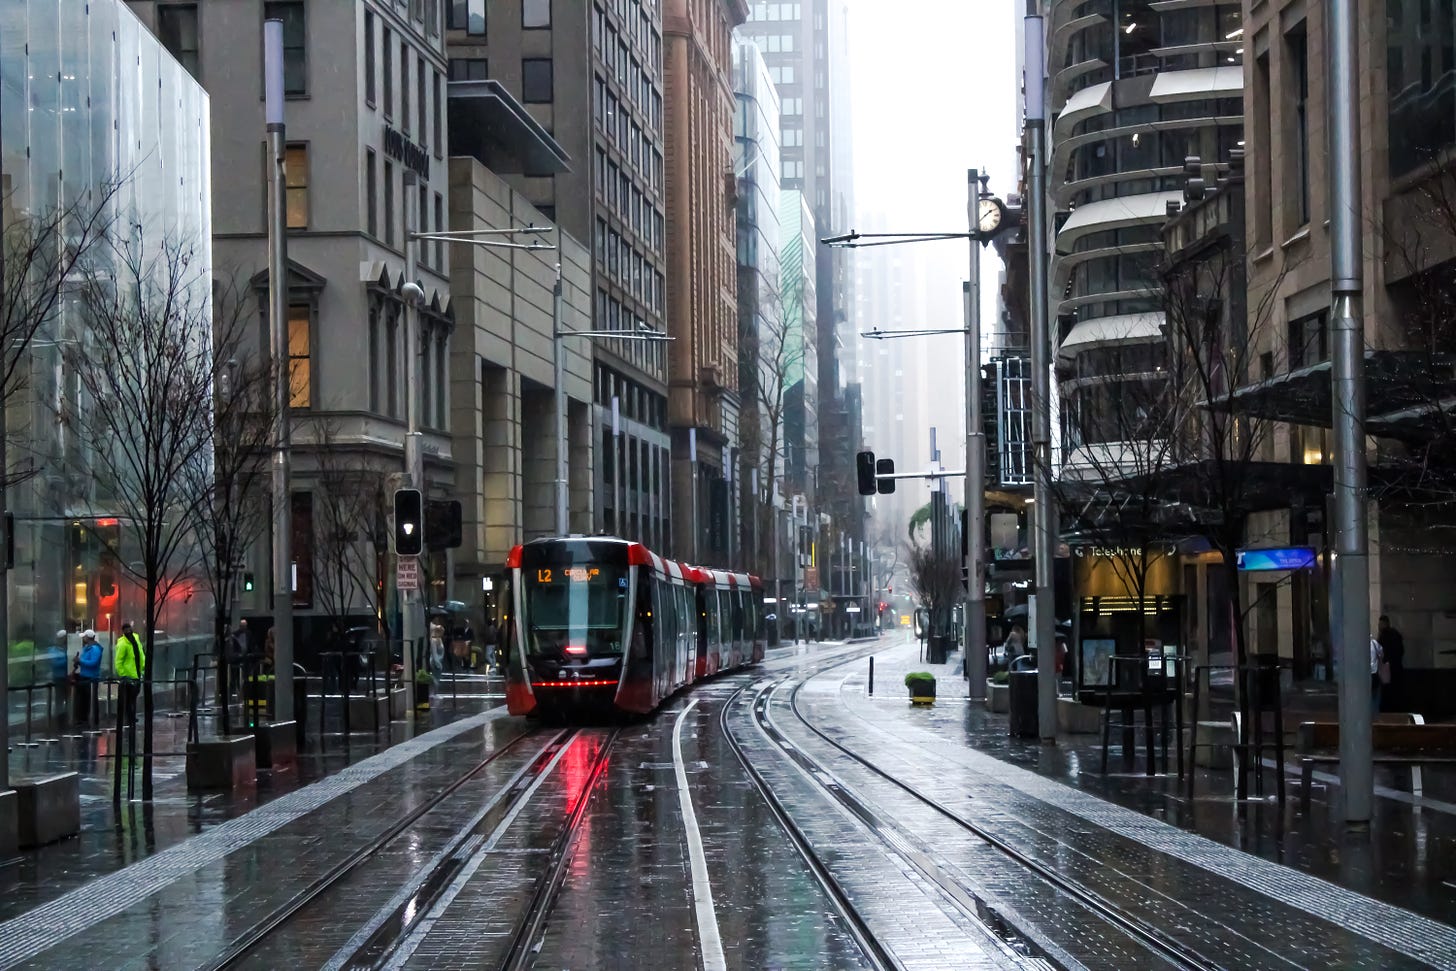 Sydney in the rain, photo taken in 2020. The road is wet and empty. A light rail is running.